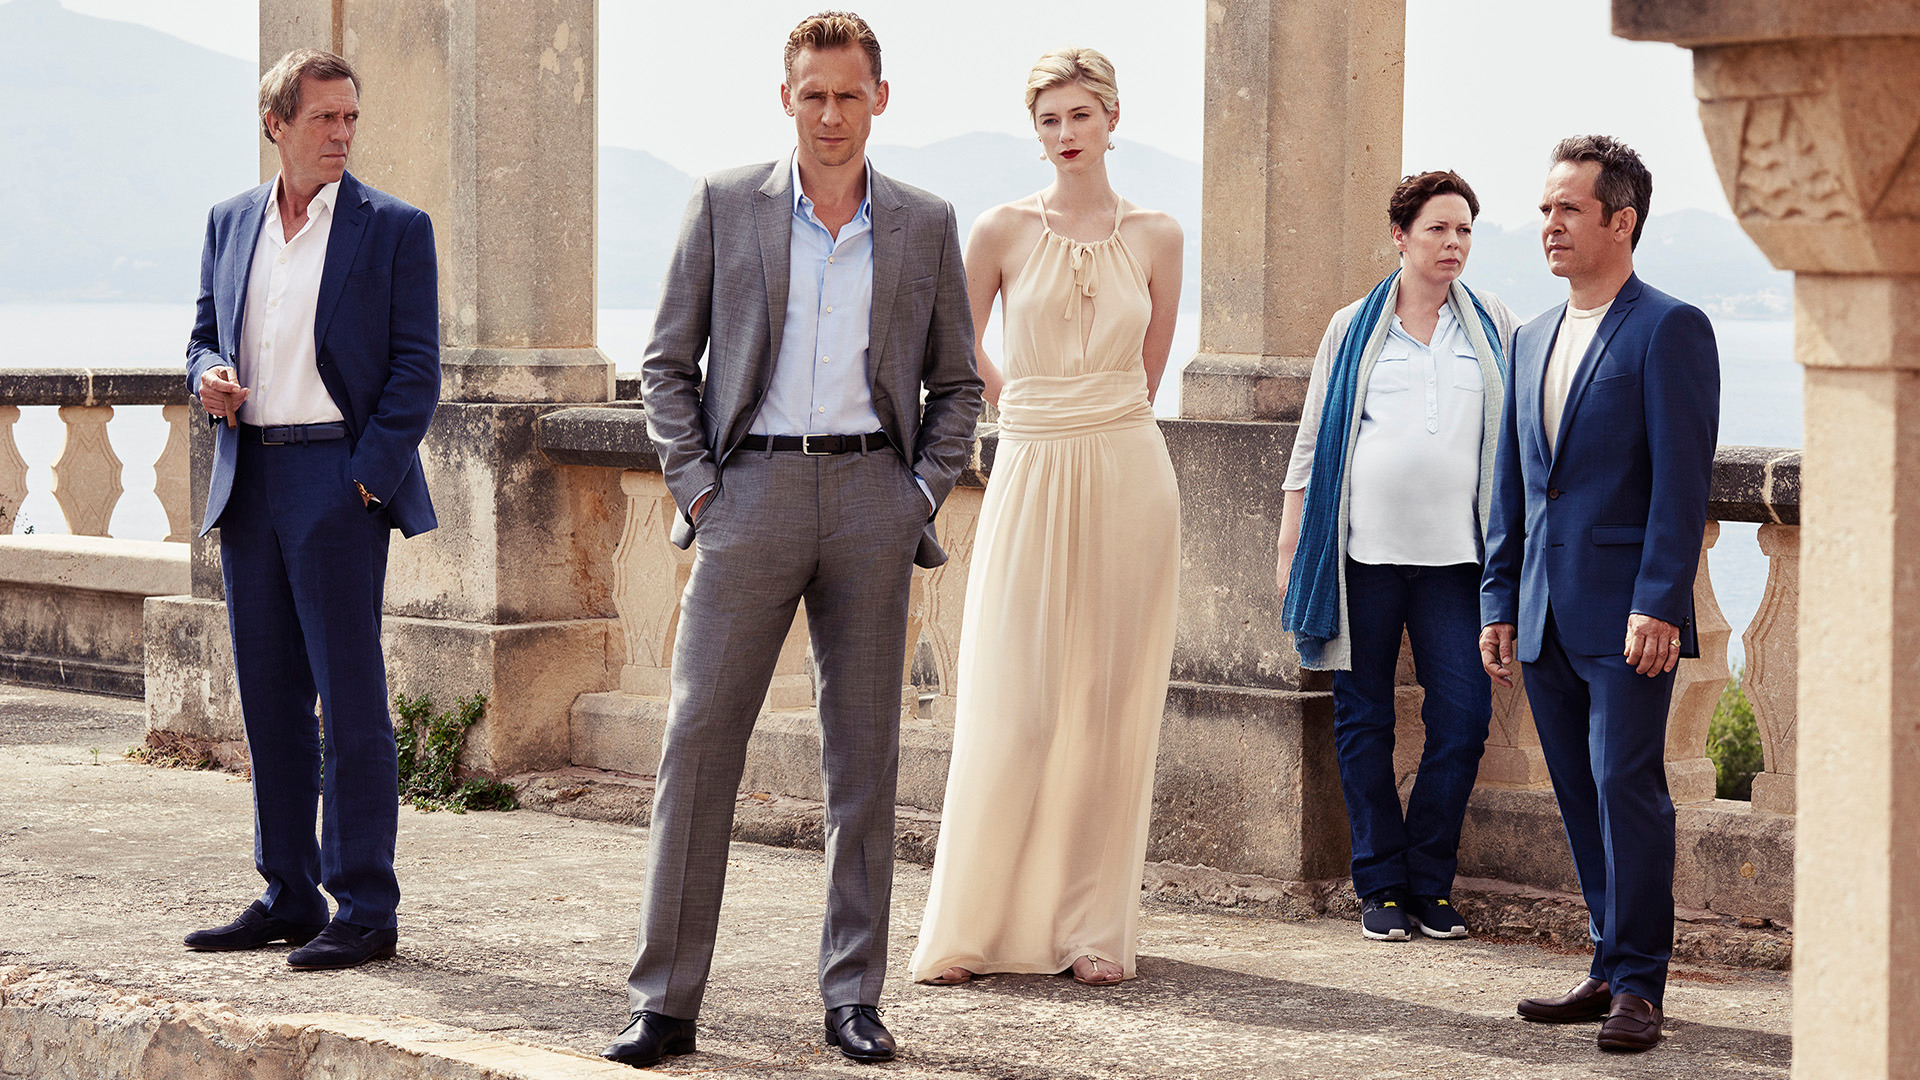 Show The Night Manager